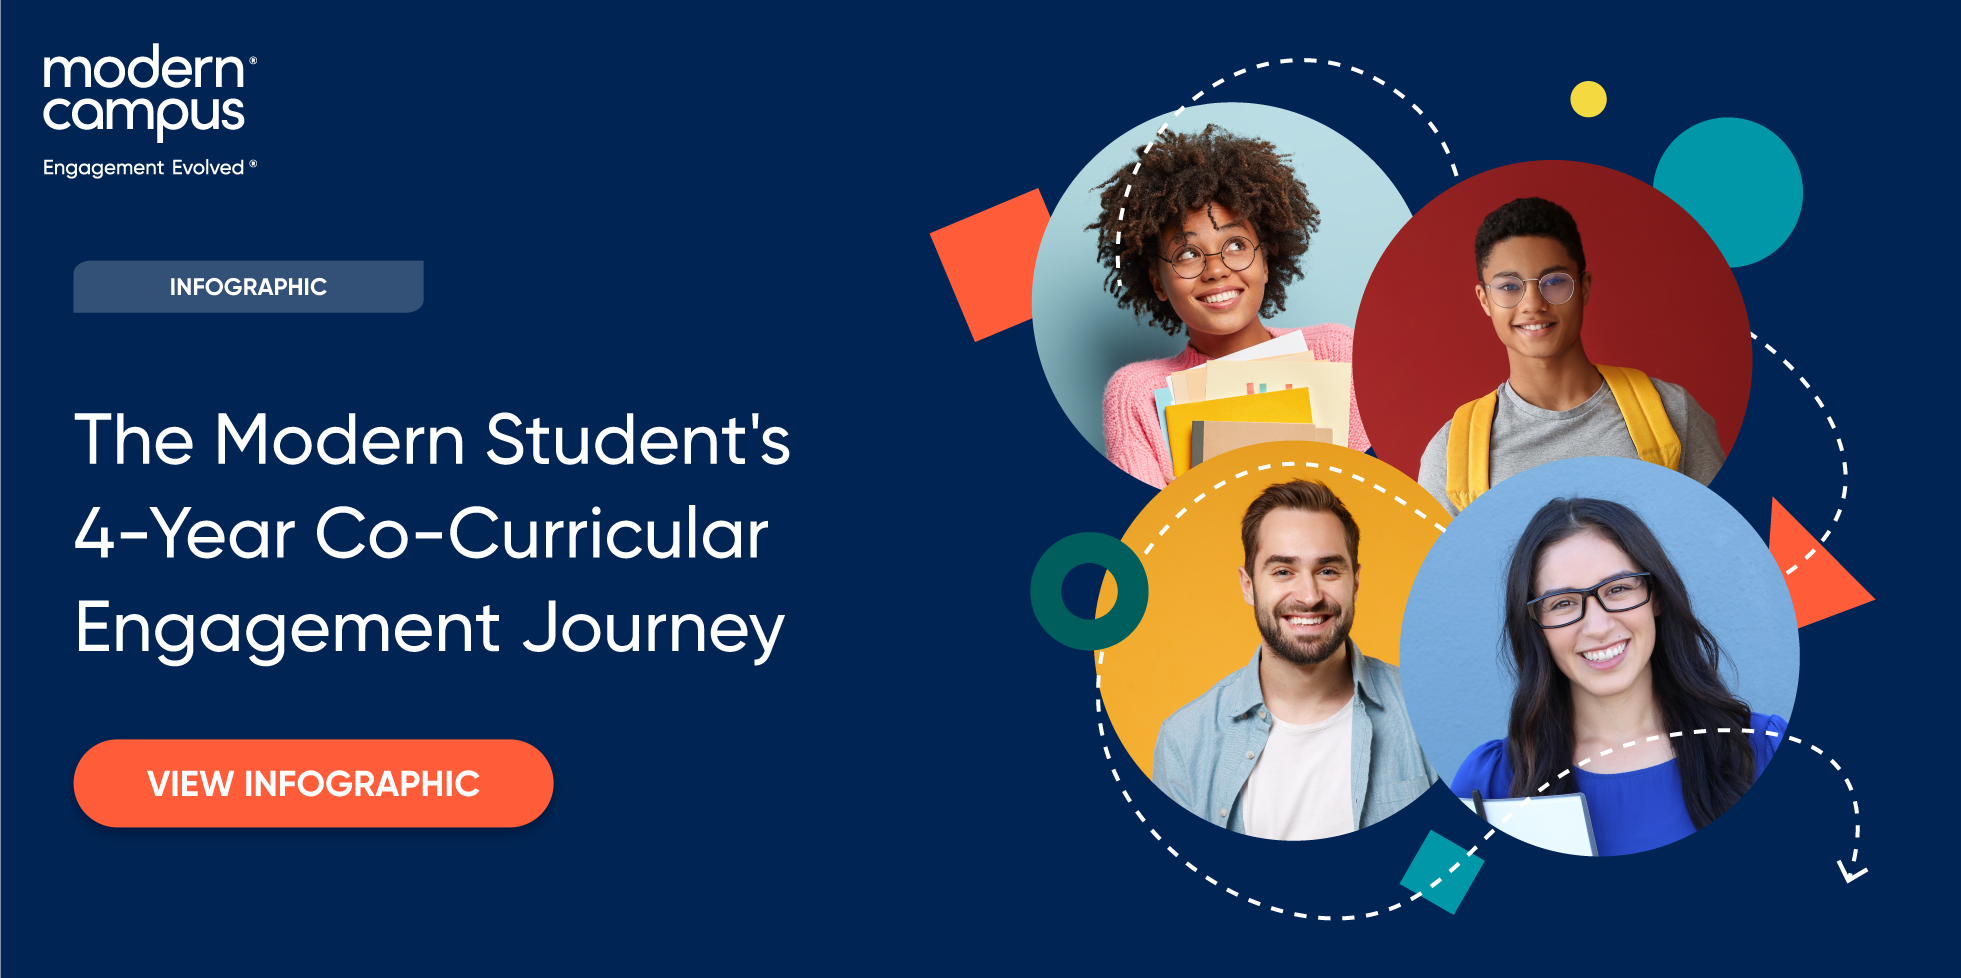 the modern student's four-year co-curricular journey - download the infographic now